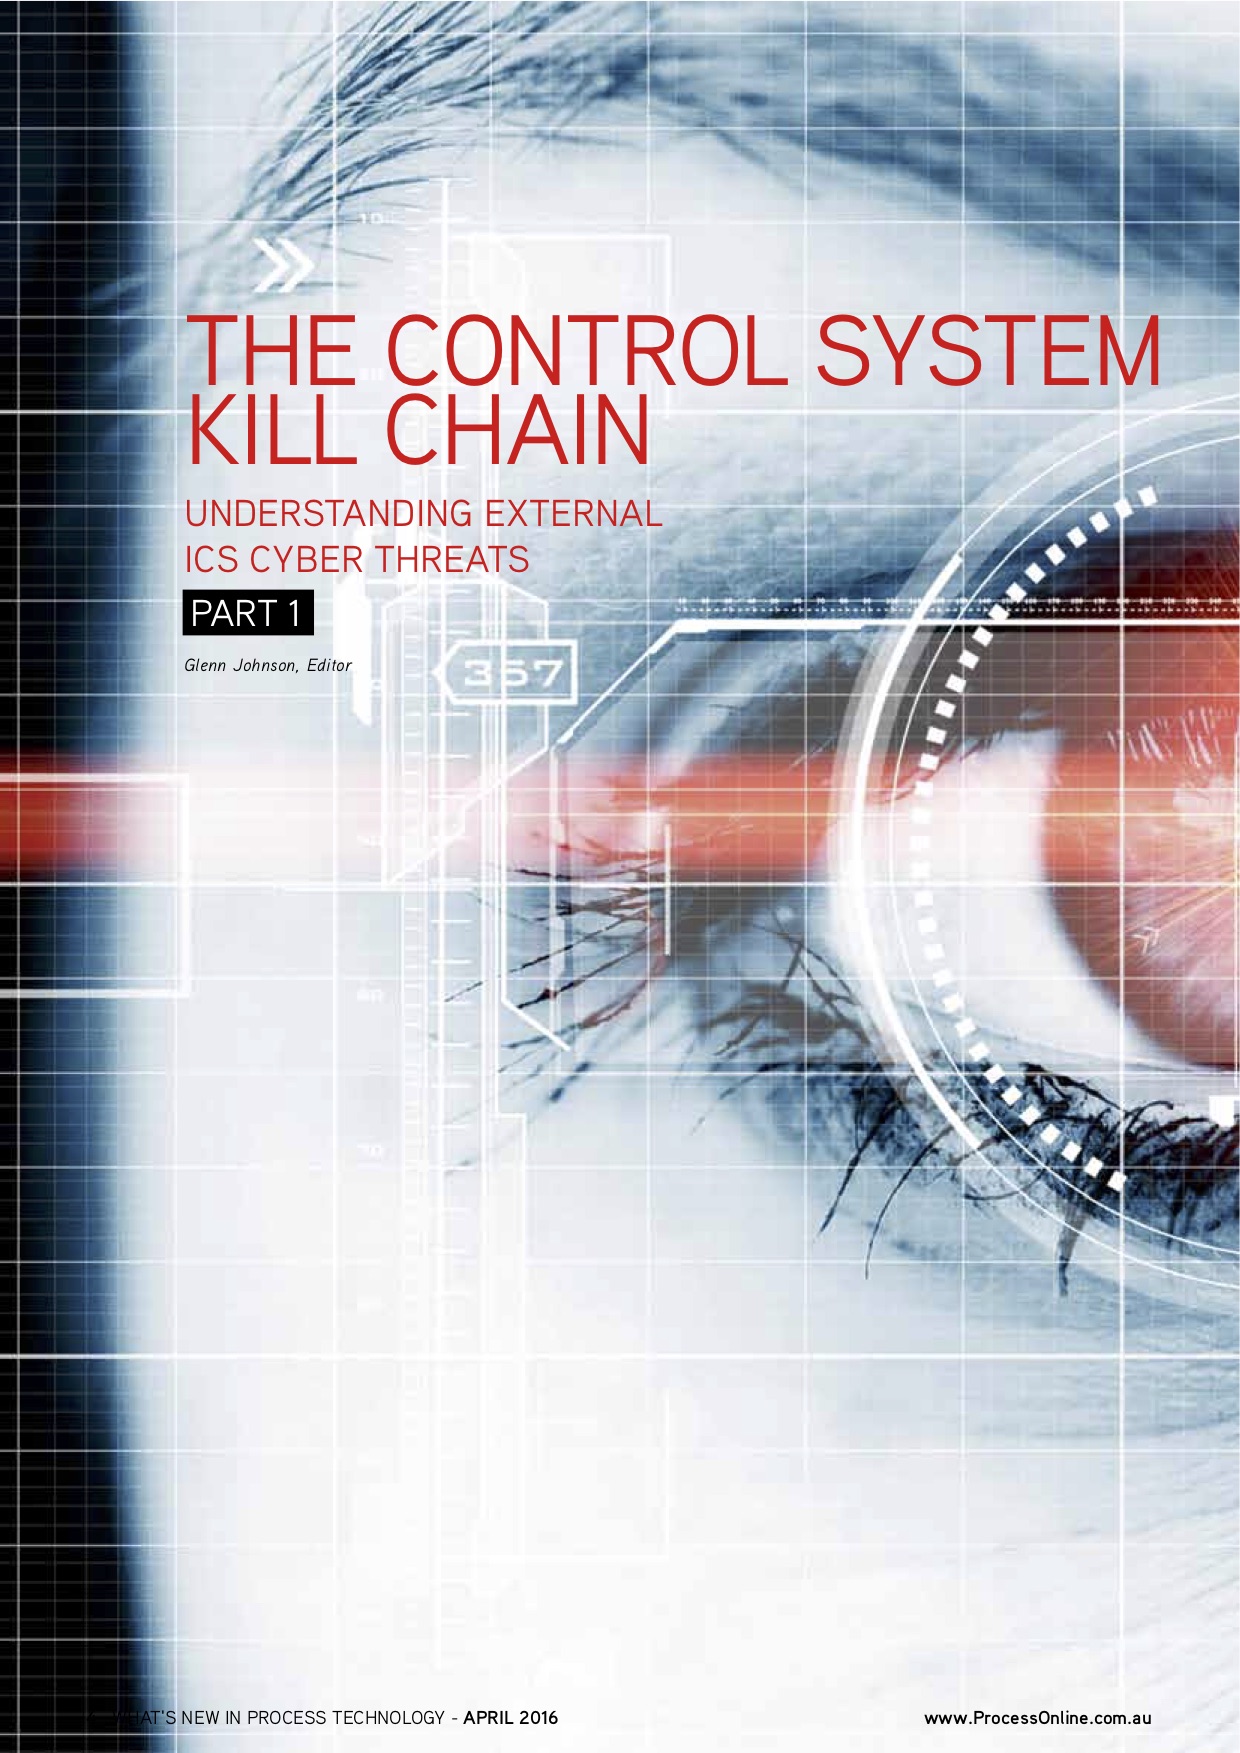 The control system kill chain described the approach an external cyber attack adversary may take in infiltrating an industrial control system